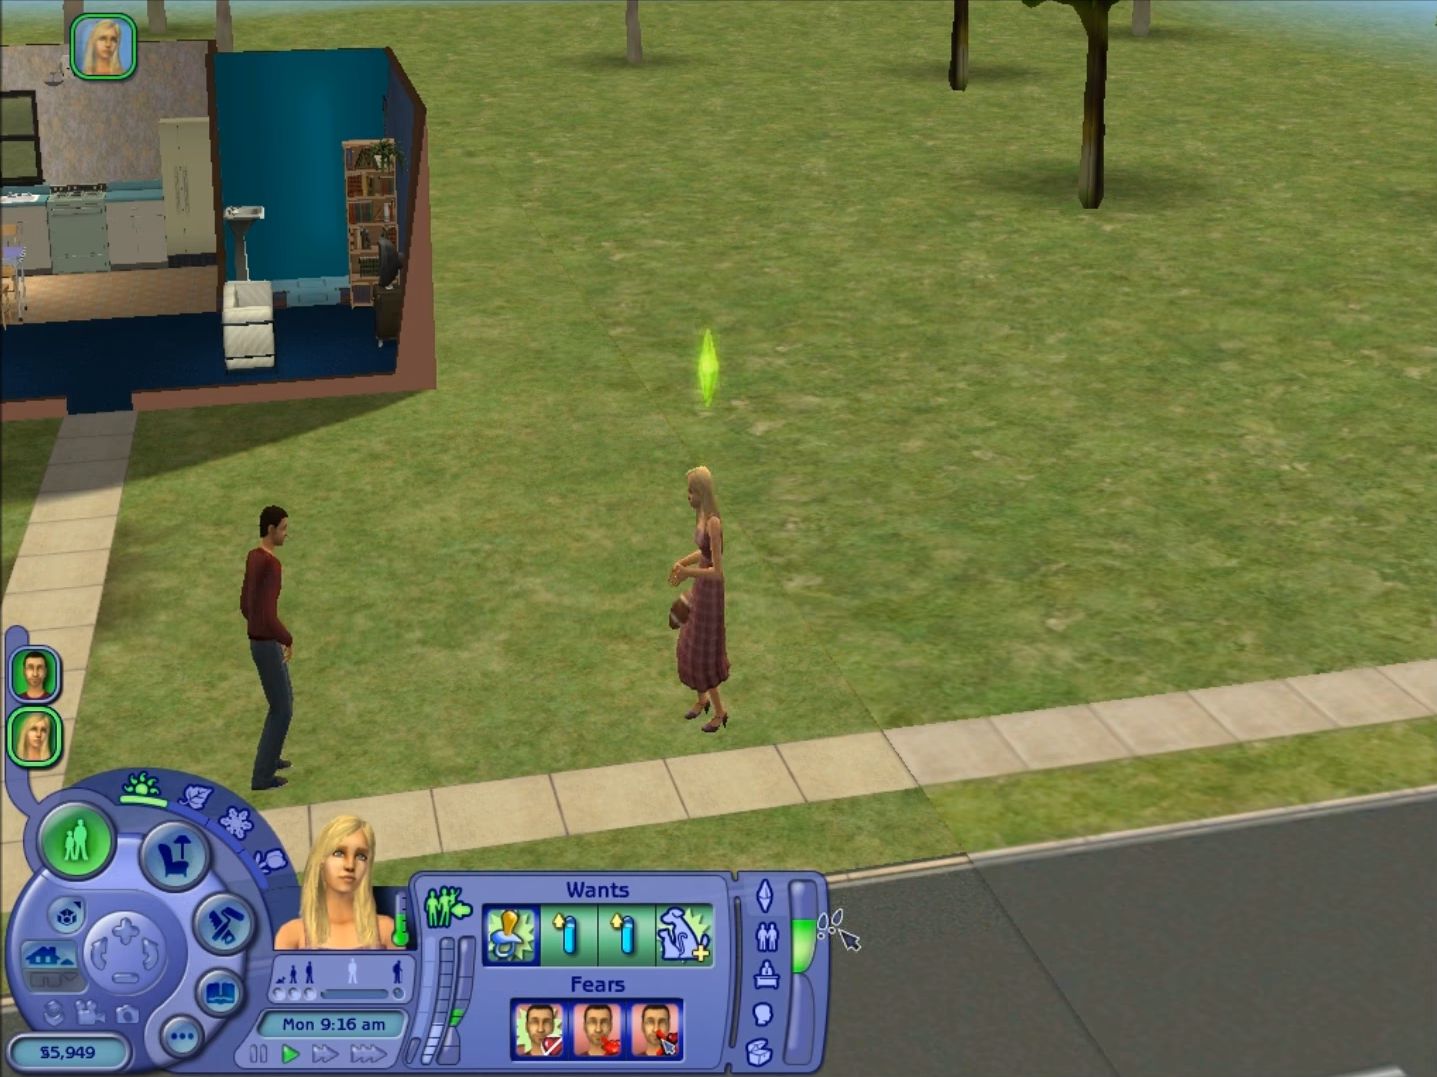 Free download game the sims 2 full version for pc windows 7